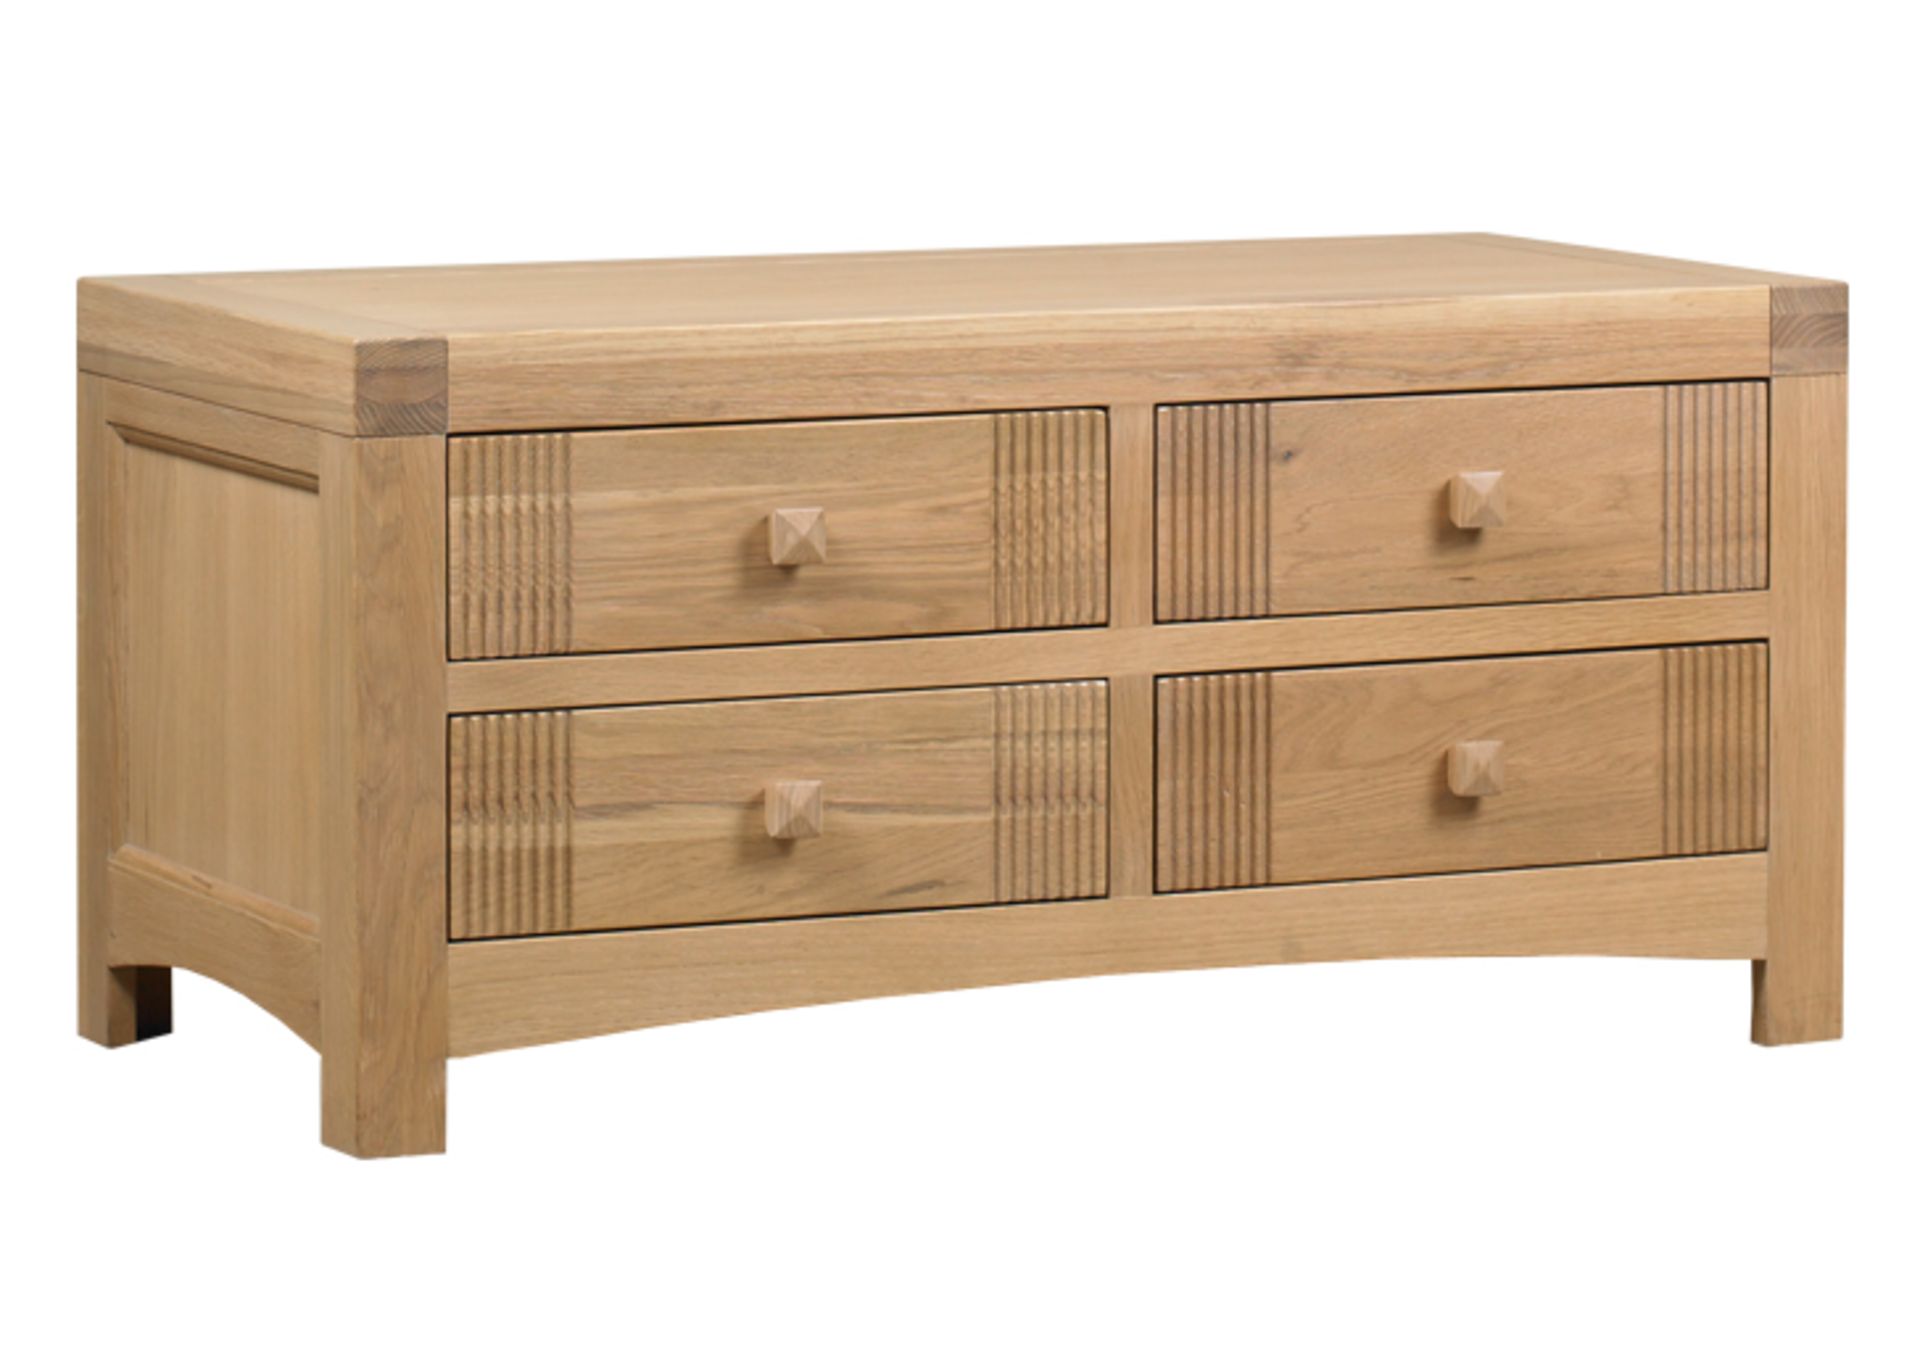 1 x Mark Webster Buckingham Coffee Table With Drawers - White Wash Oak With a Timeless Design - Full - Image 3 of 3